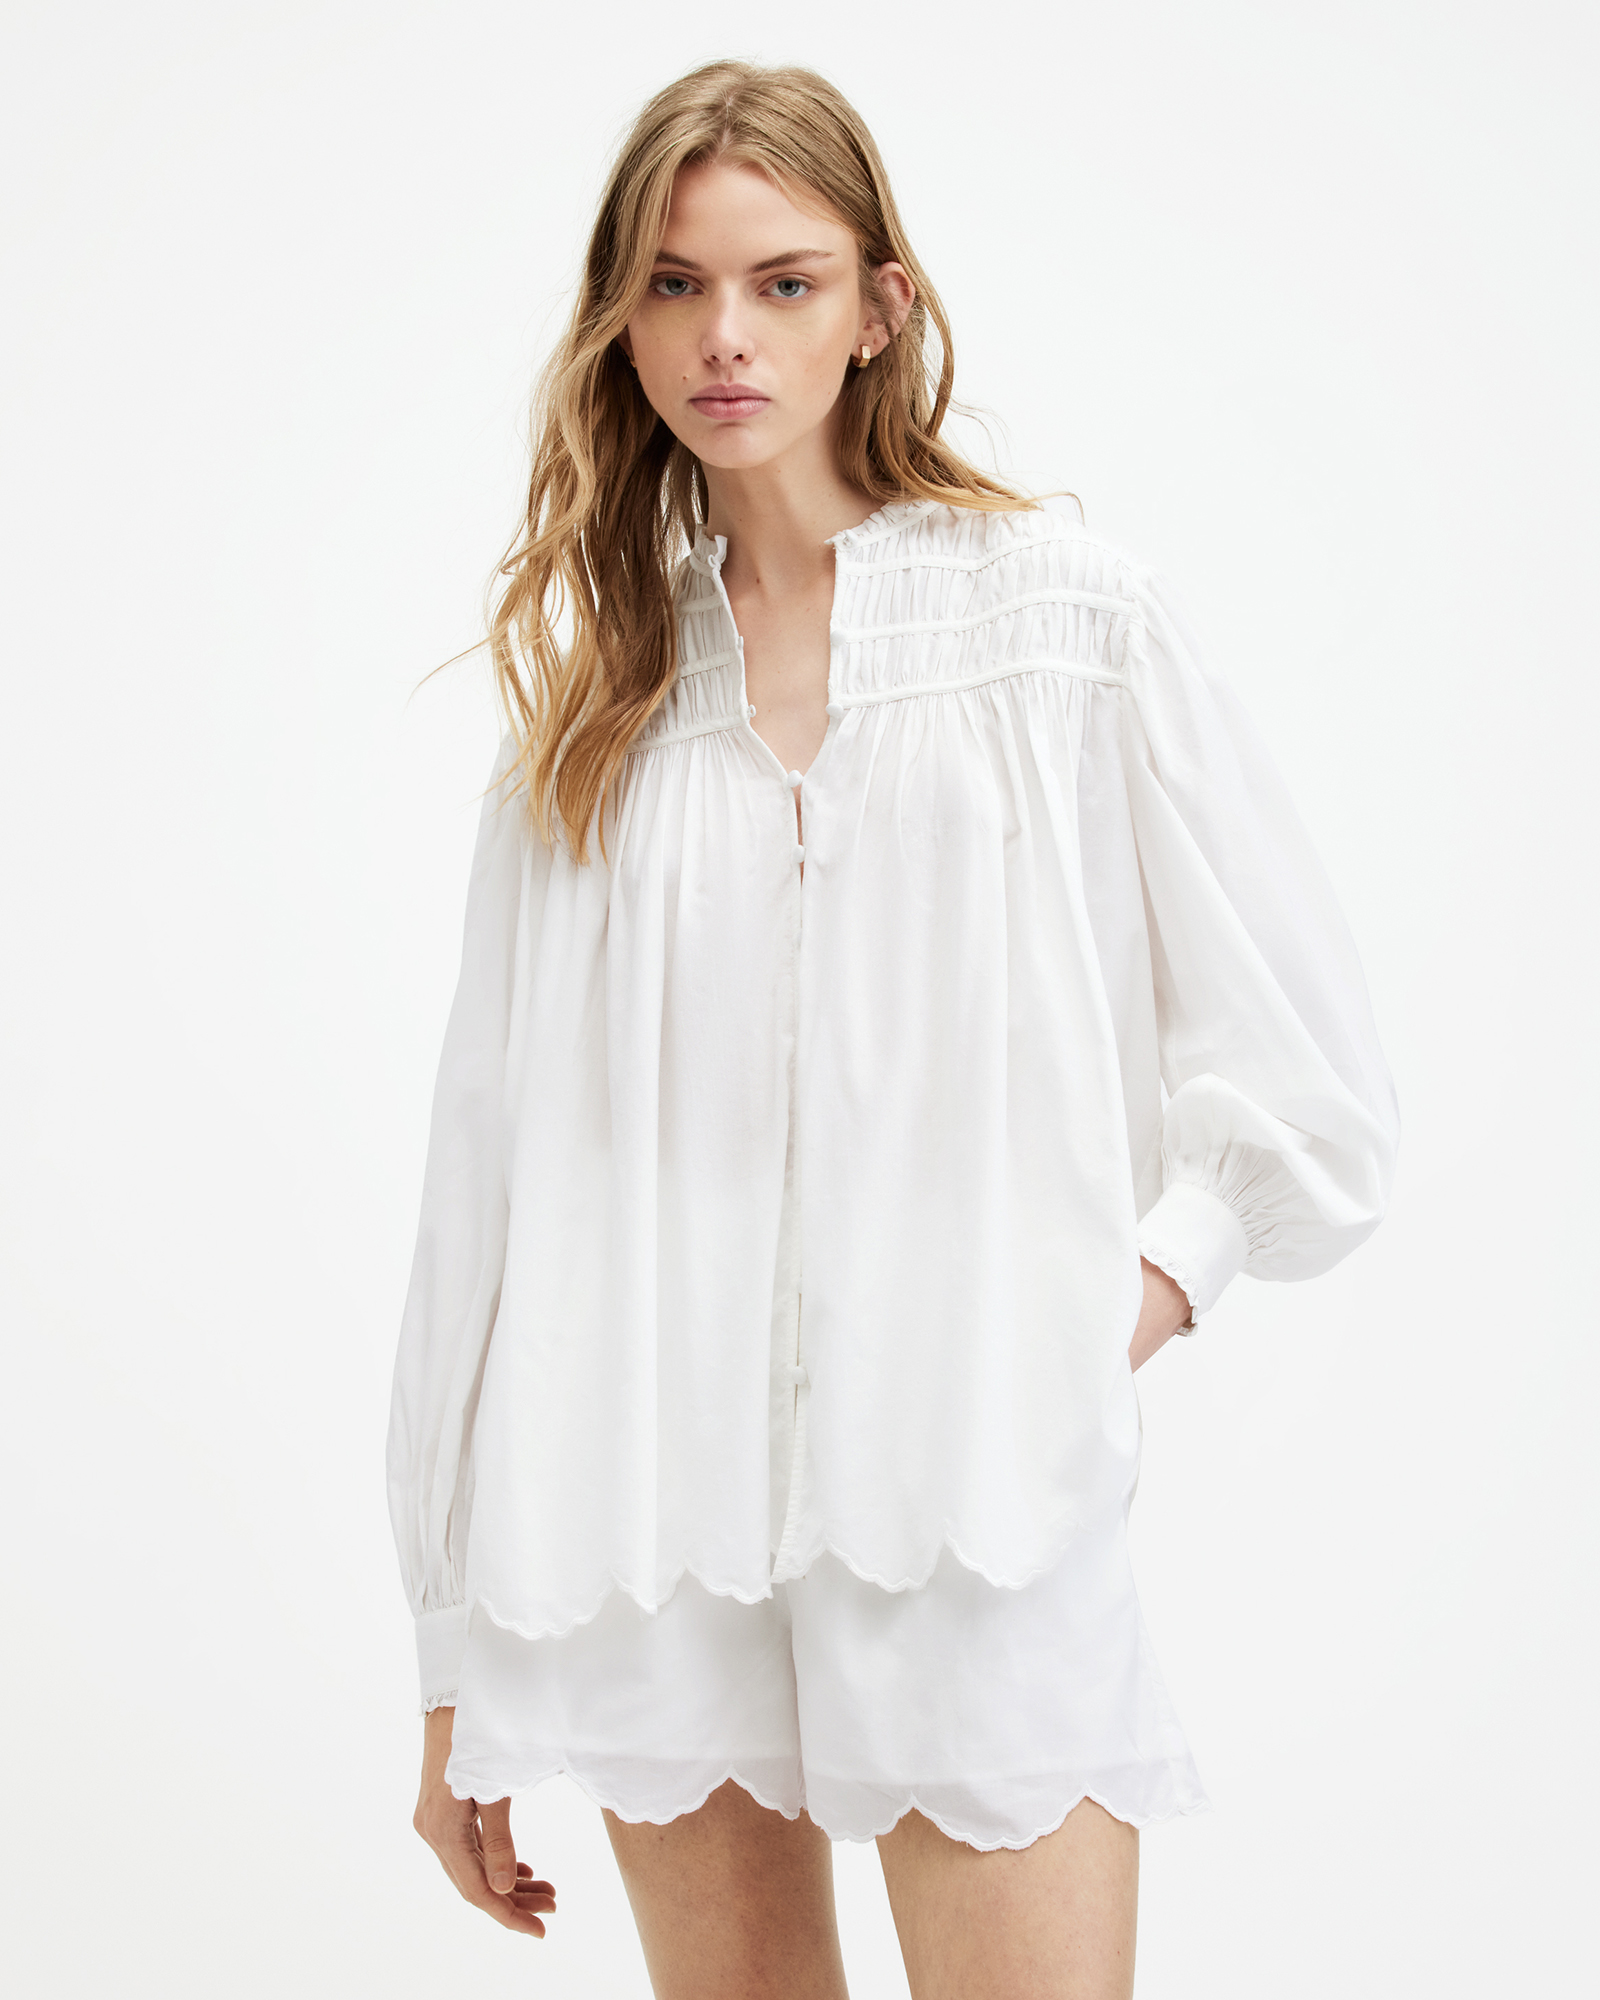 AllSaints Etti Relaxed Fit Scallop Edge Shirt,, Off White